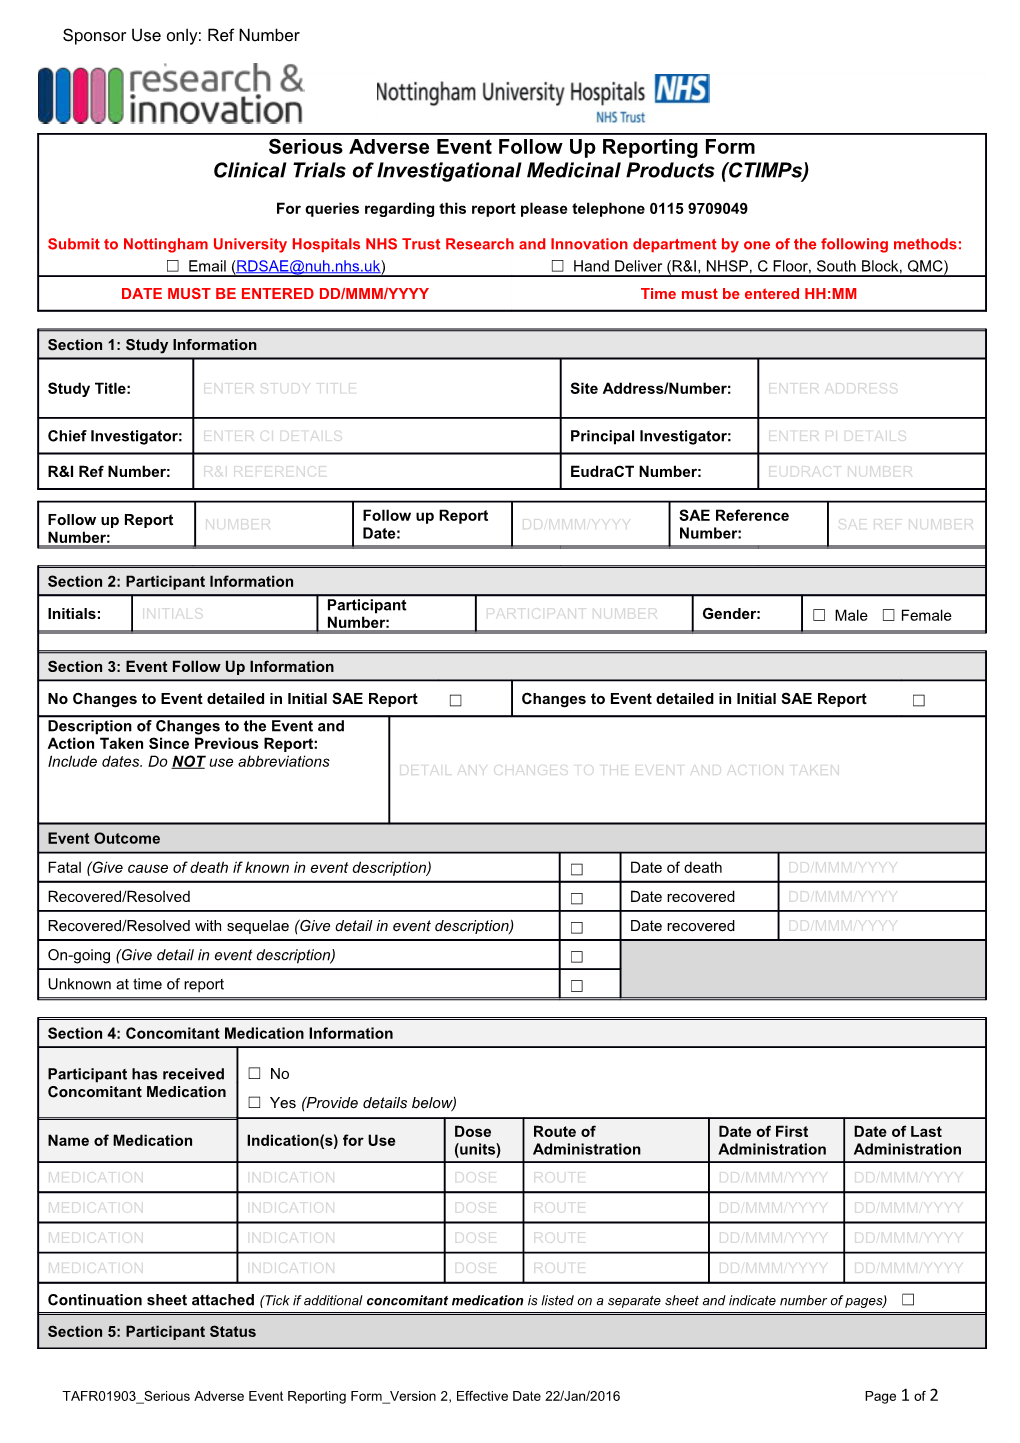 TAFR01903 Serious Adverse Event Reporting Form Version 2 , Effective Date 22/Jan/2016 Page